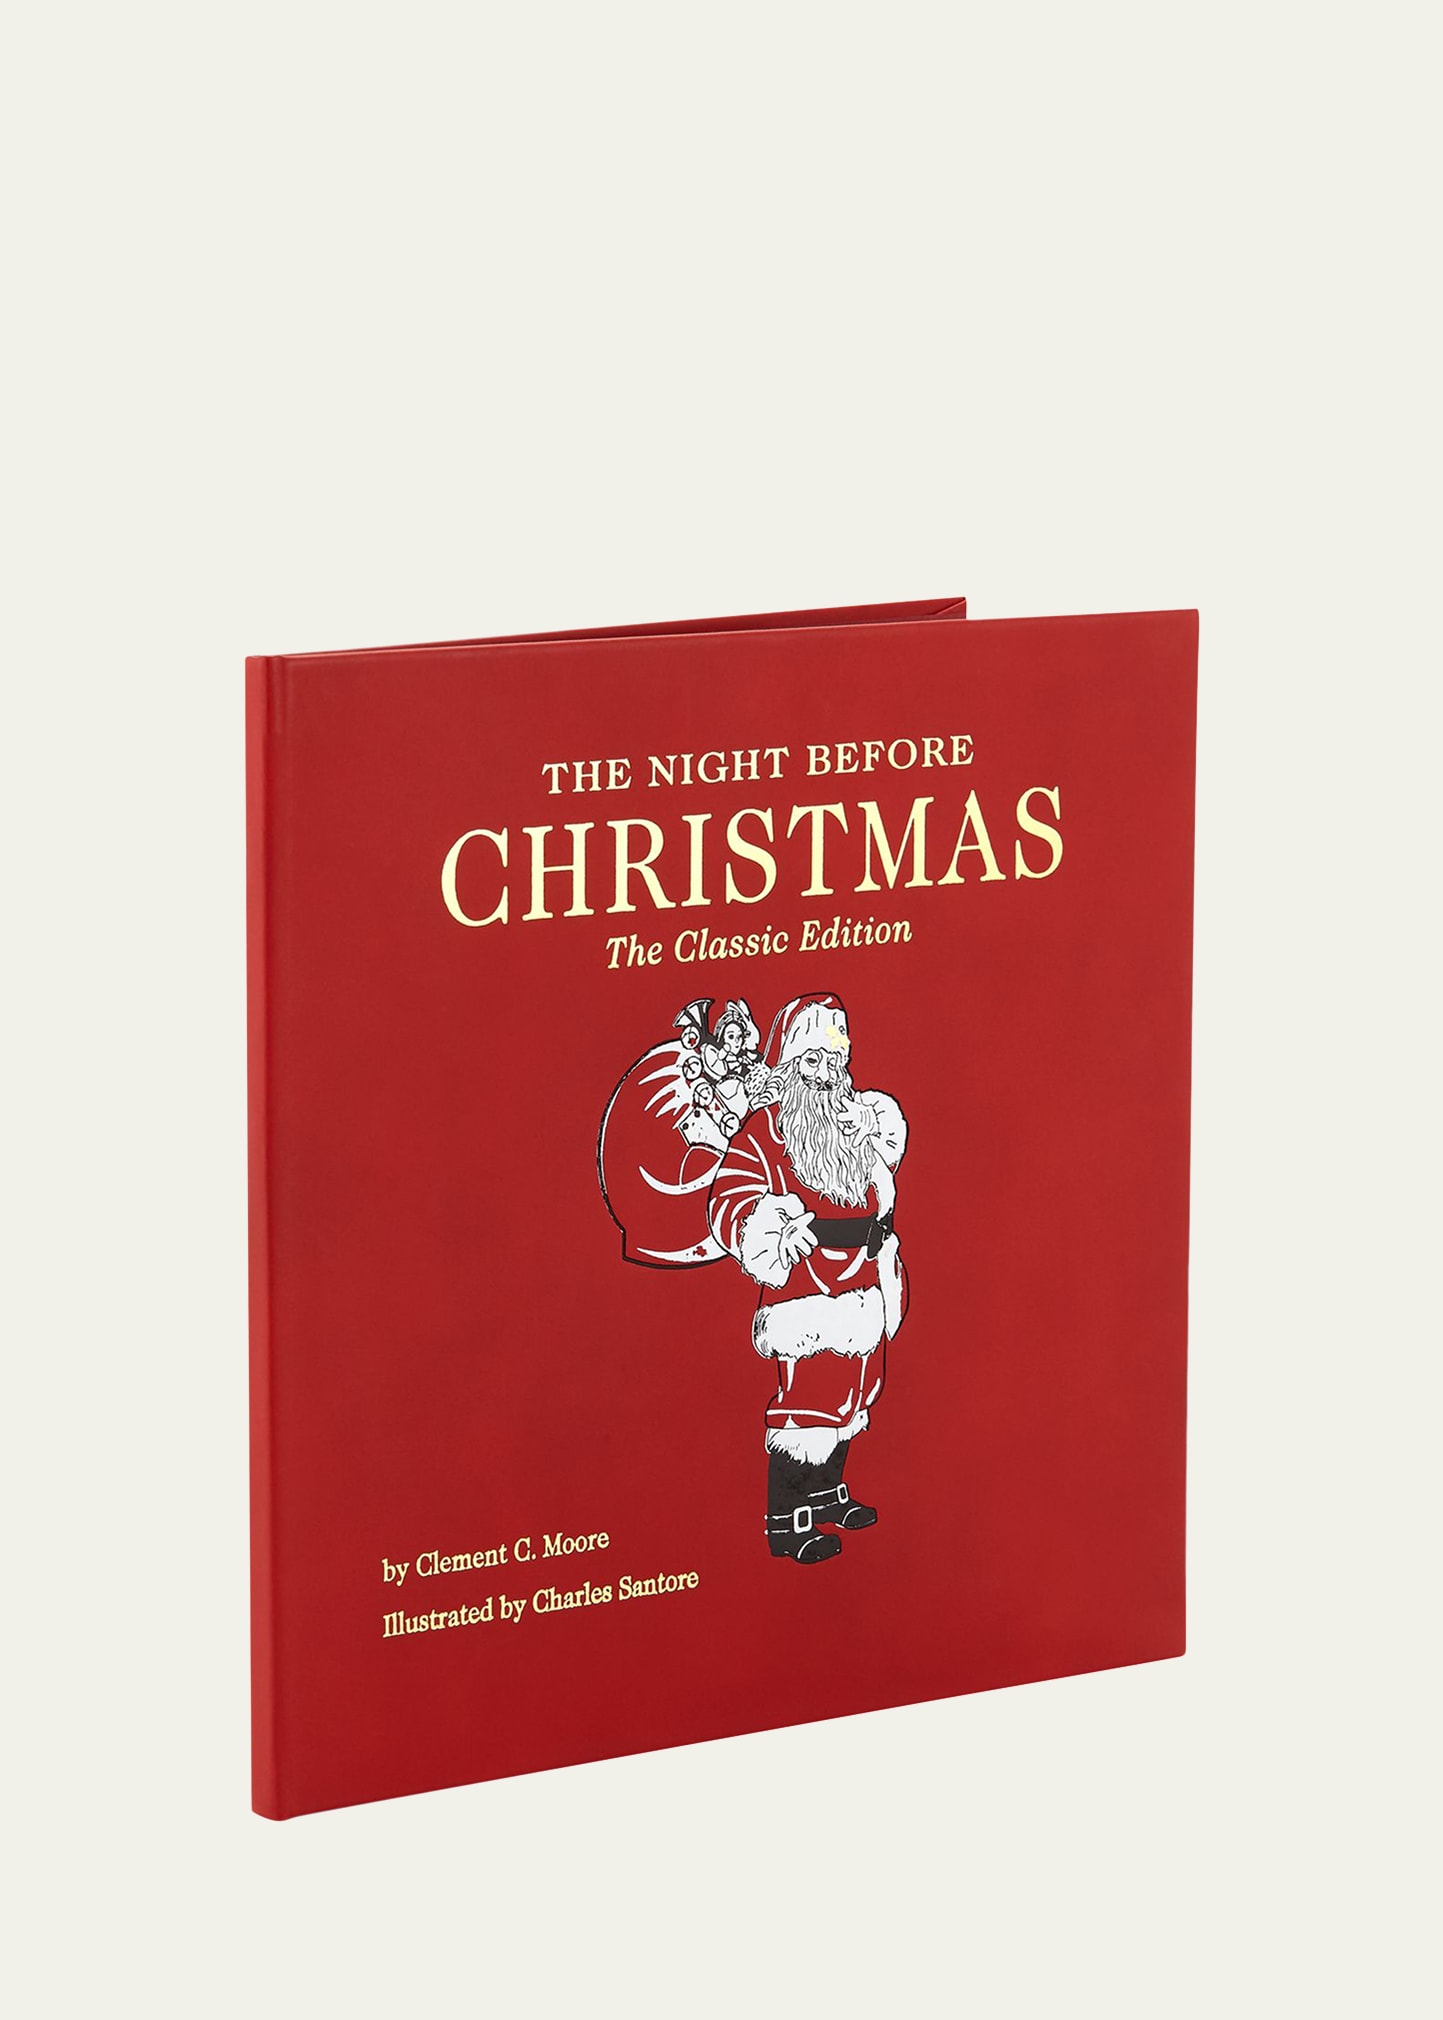 "The Night Before Christmas: The Classic Edition" Book by Clement C. Moore